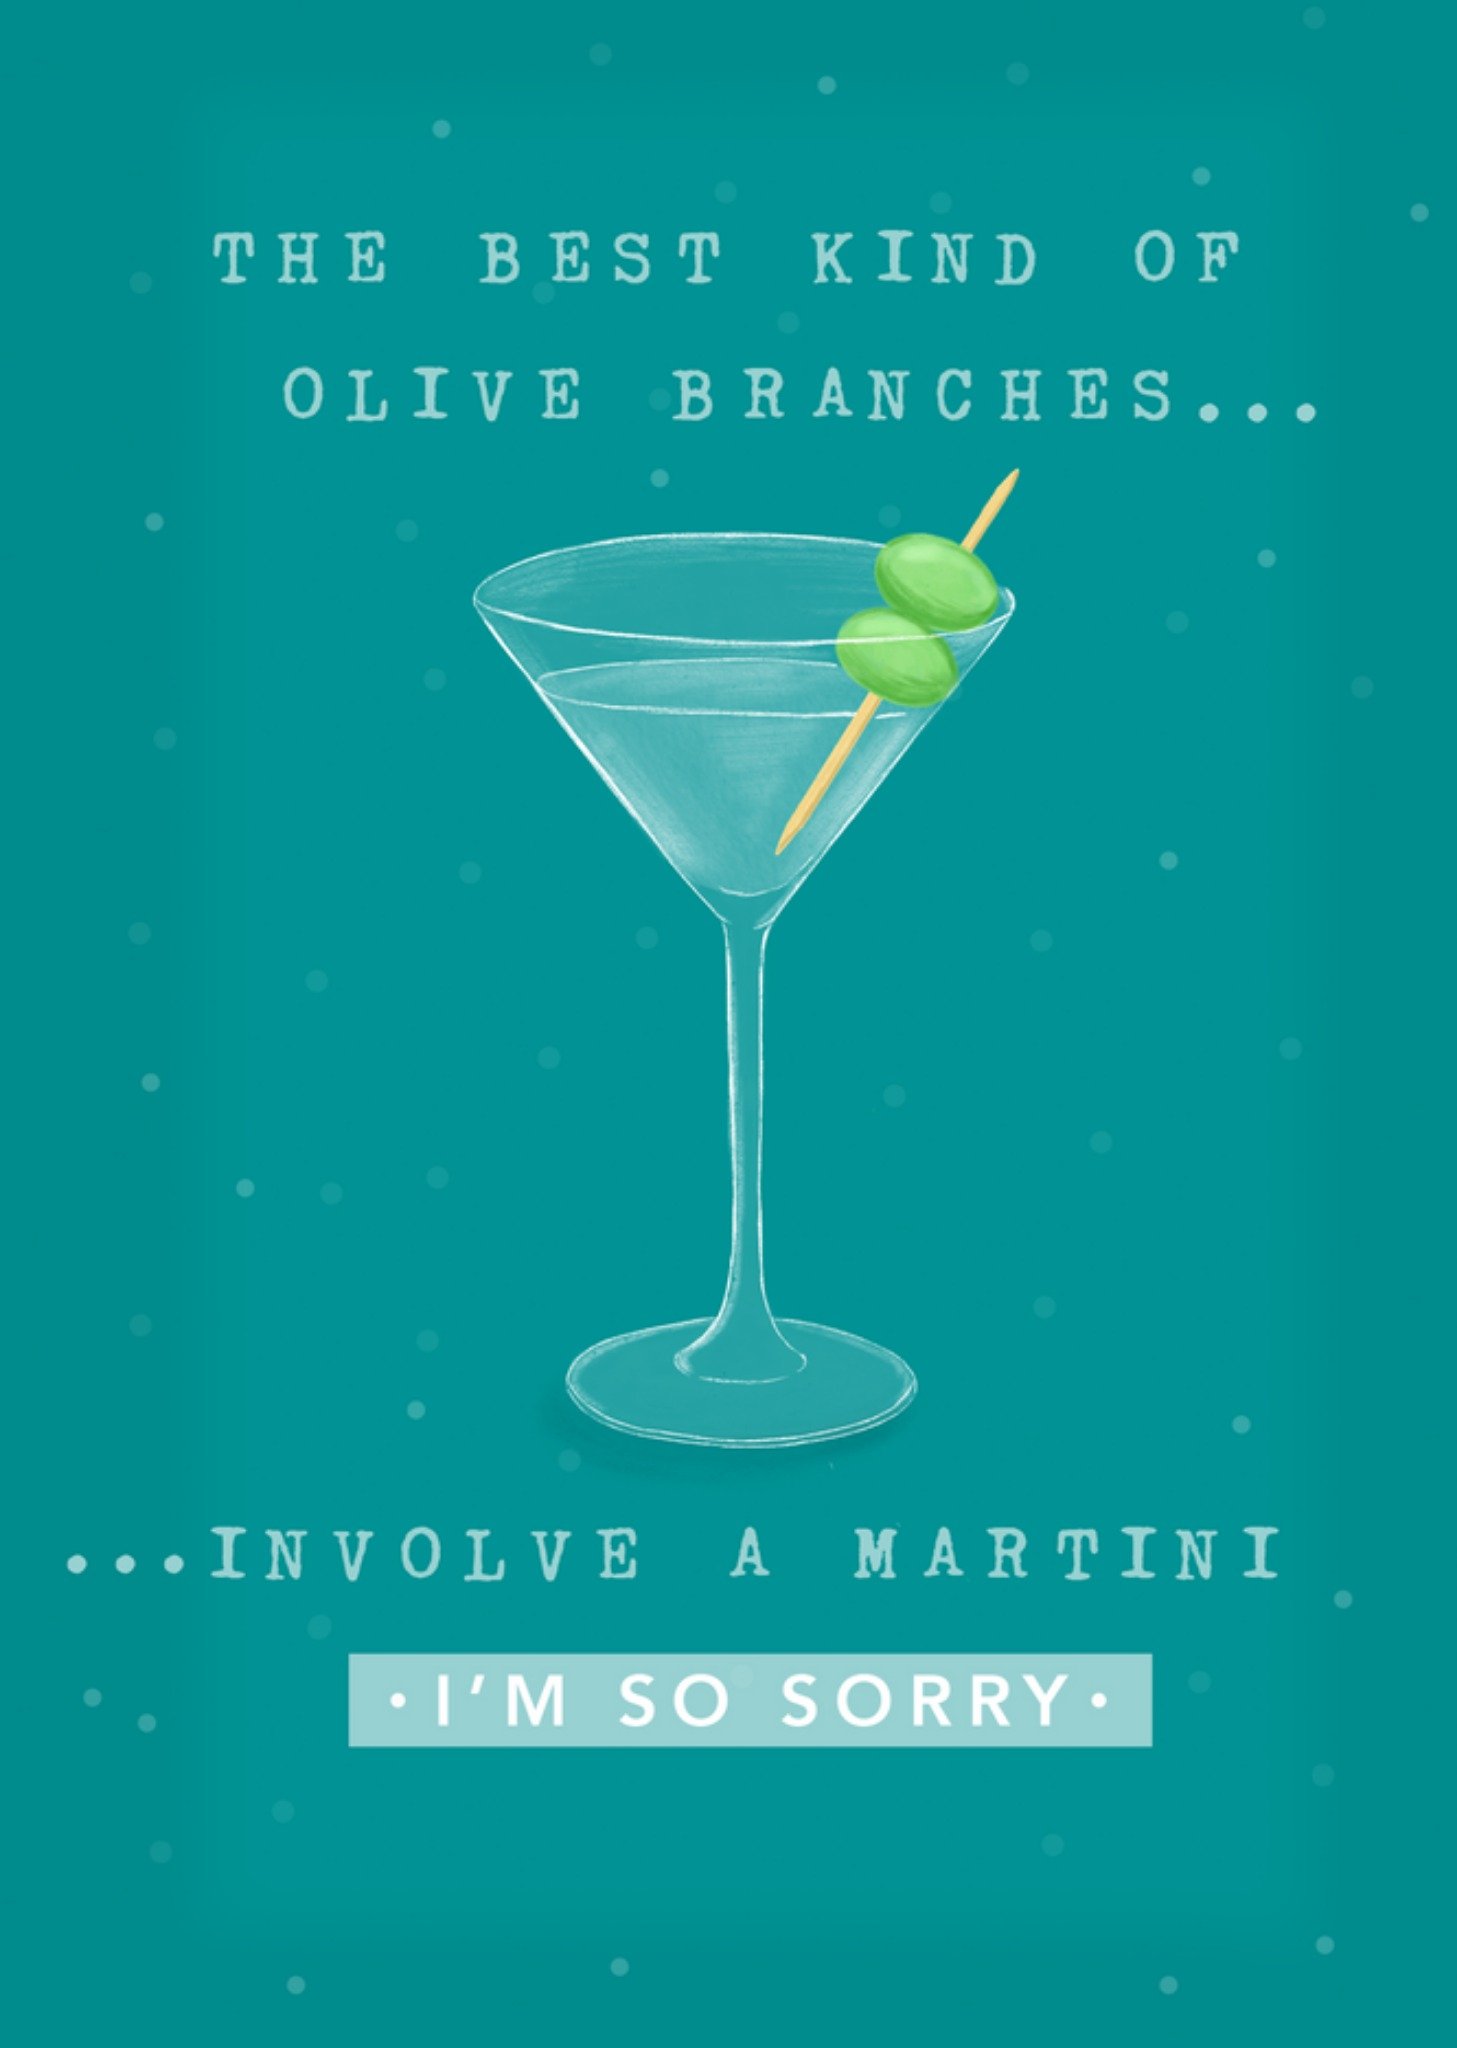 Moonpig Lighthearted The Best Olive Branches Involve A Martini Sorry Card, Large